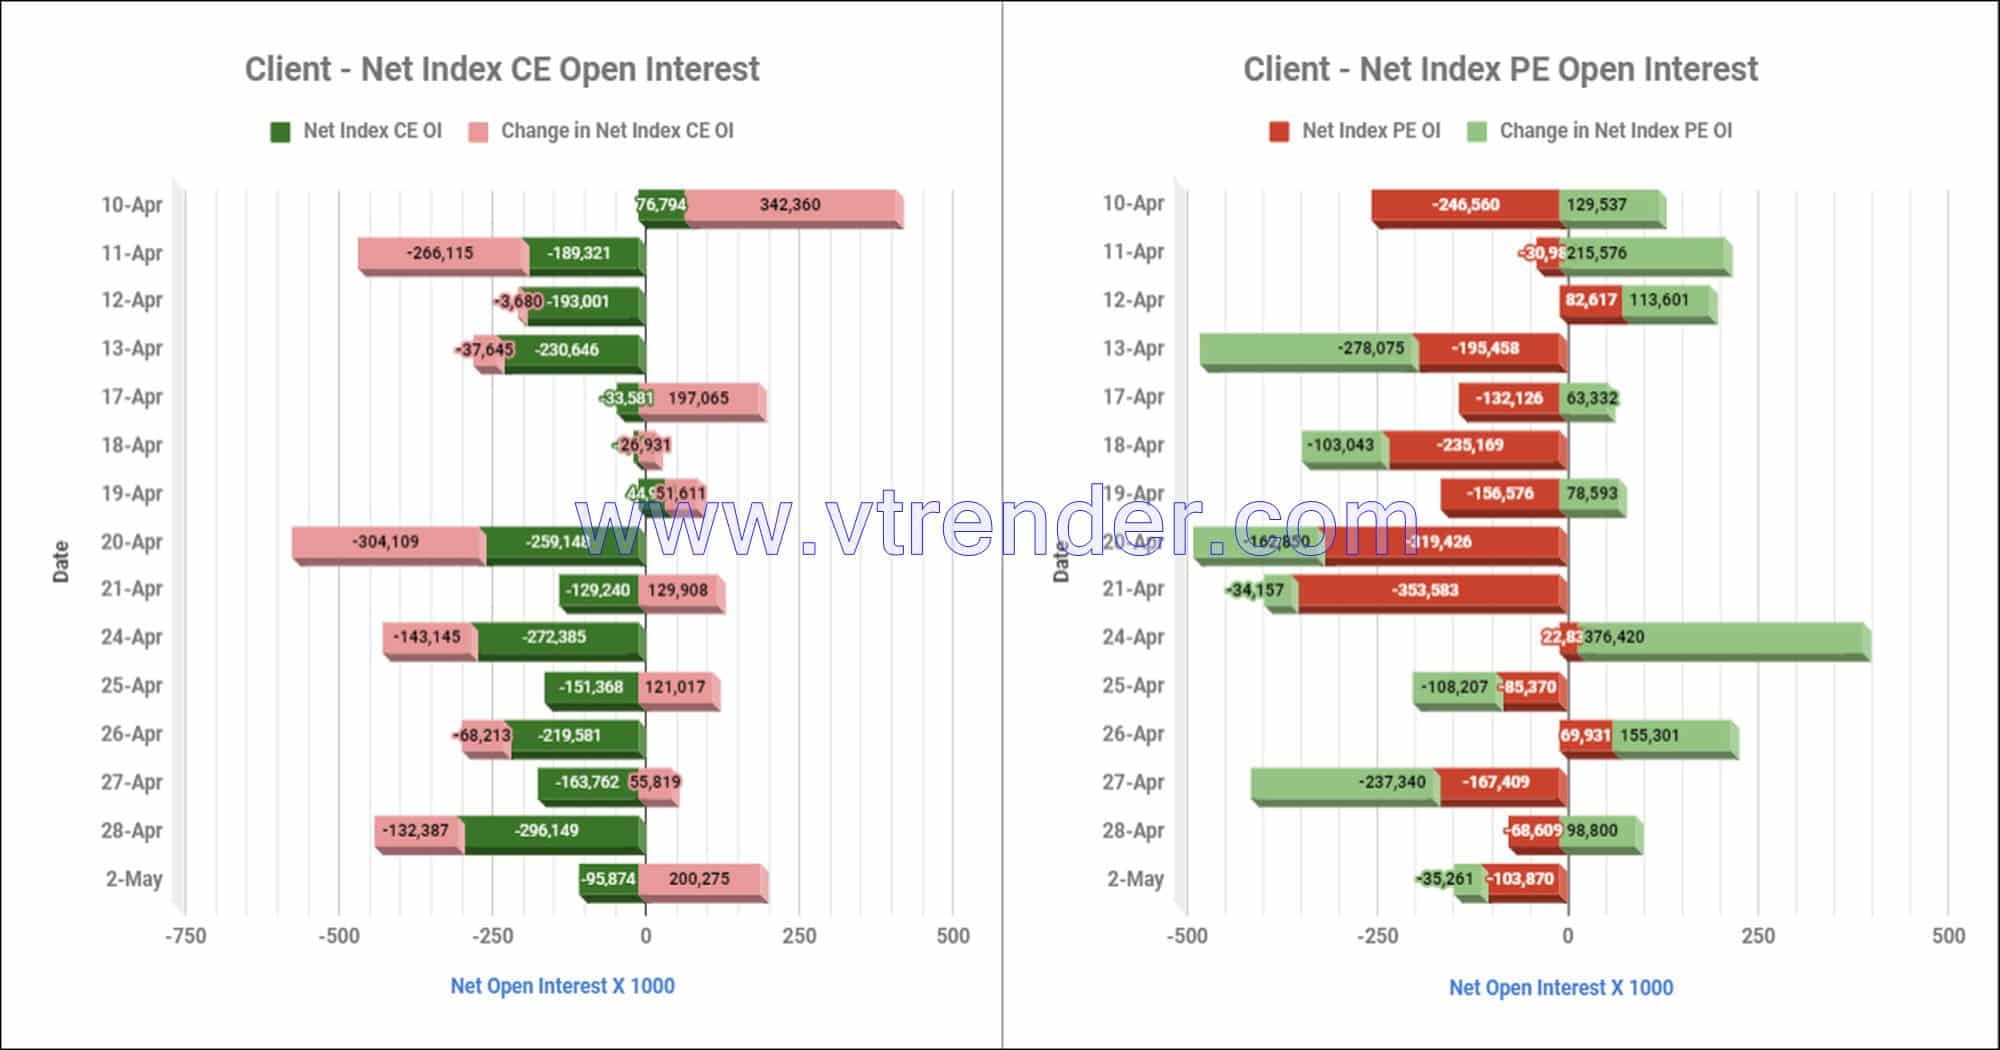 Clientinop02May Participantwise Net Open Interest And Net Equity Investments – 2Nd May 2023 Client, Equity, Fii, Index Futures, Index Options, Open Interest, Prop